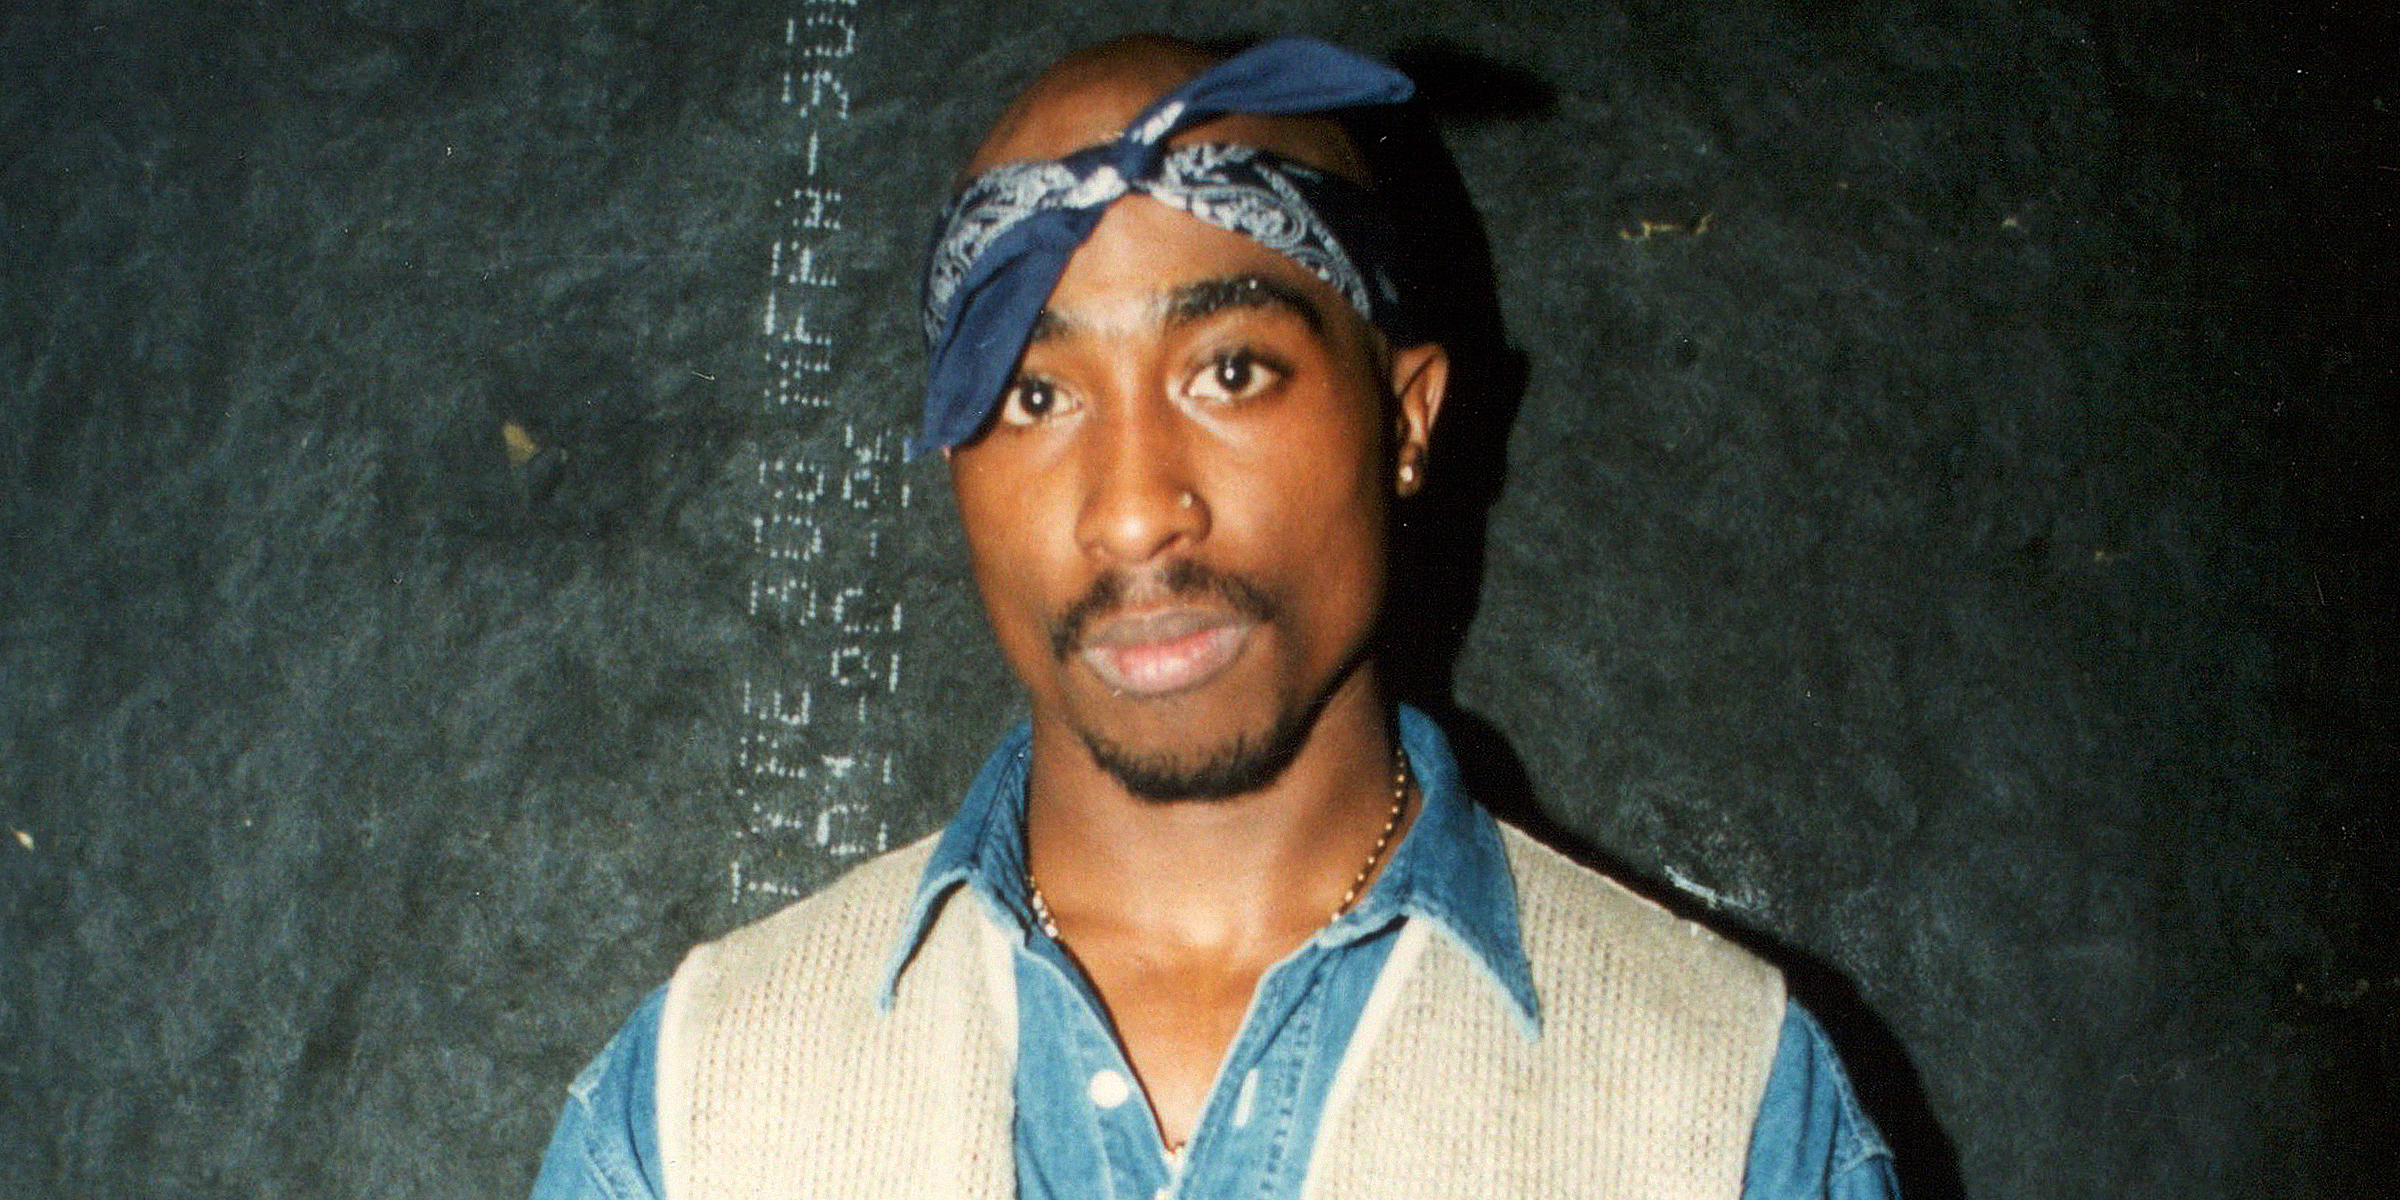 Tupac Shakur | Source: Getty Images